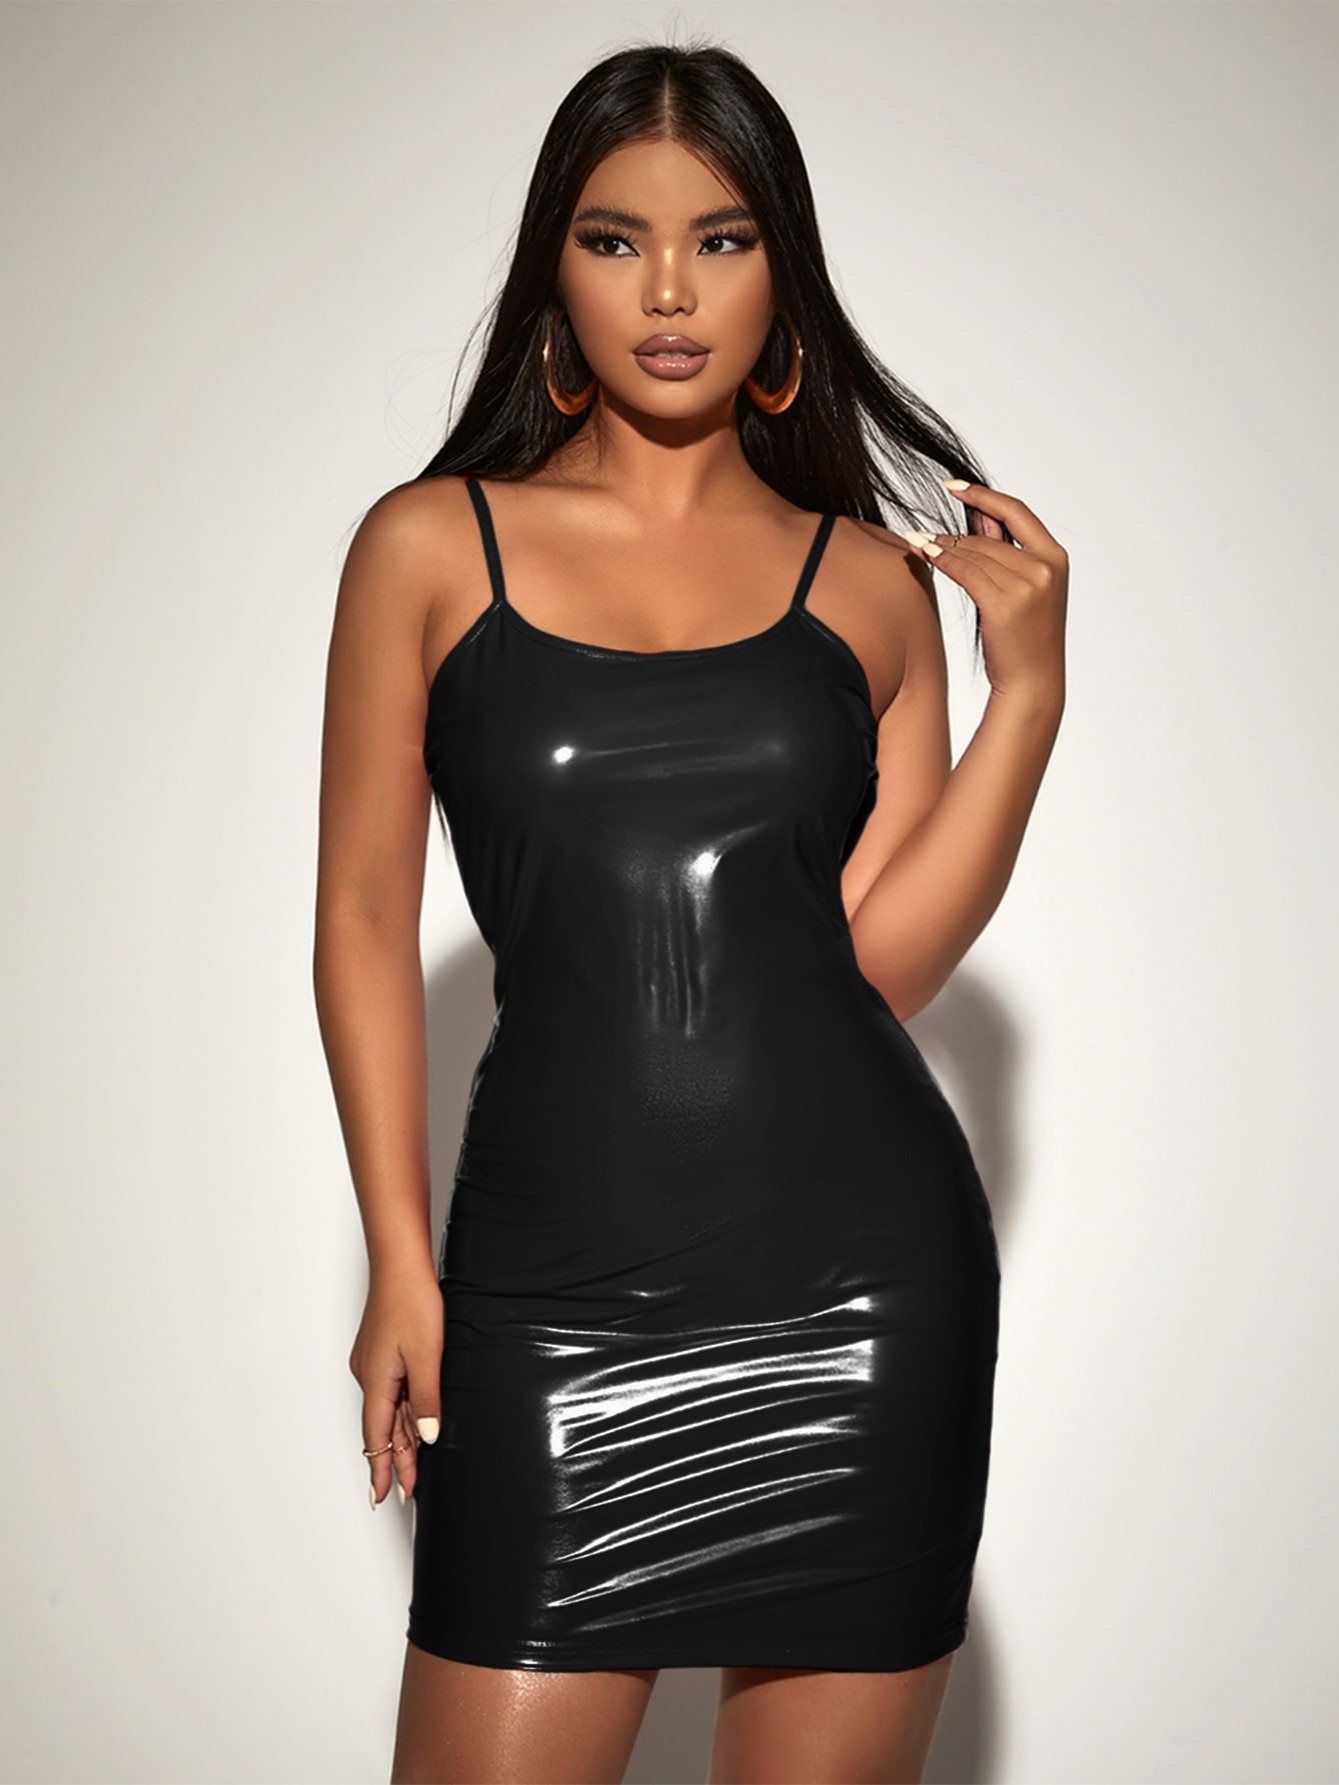 Leather Mini and short dresses for Women